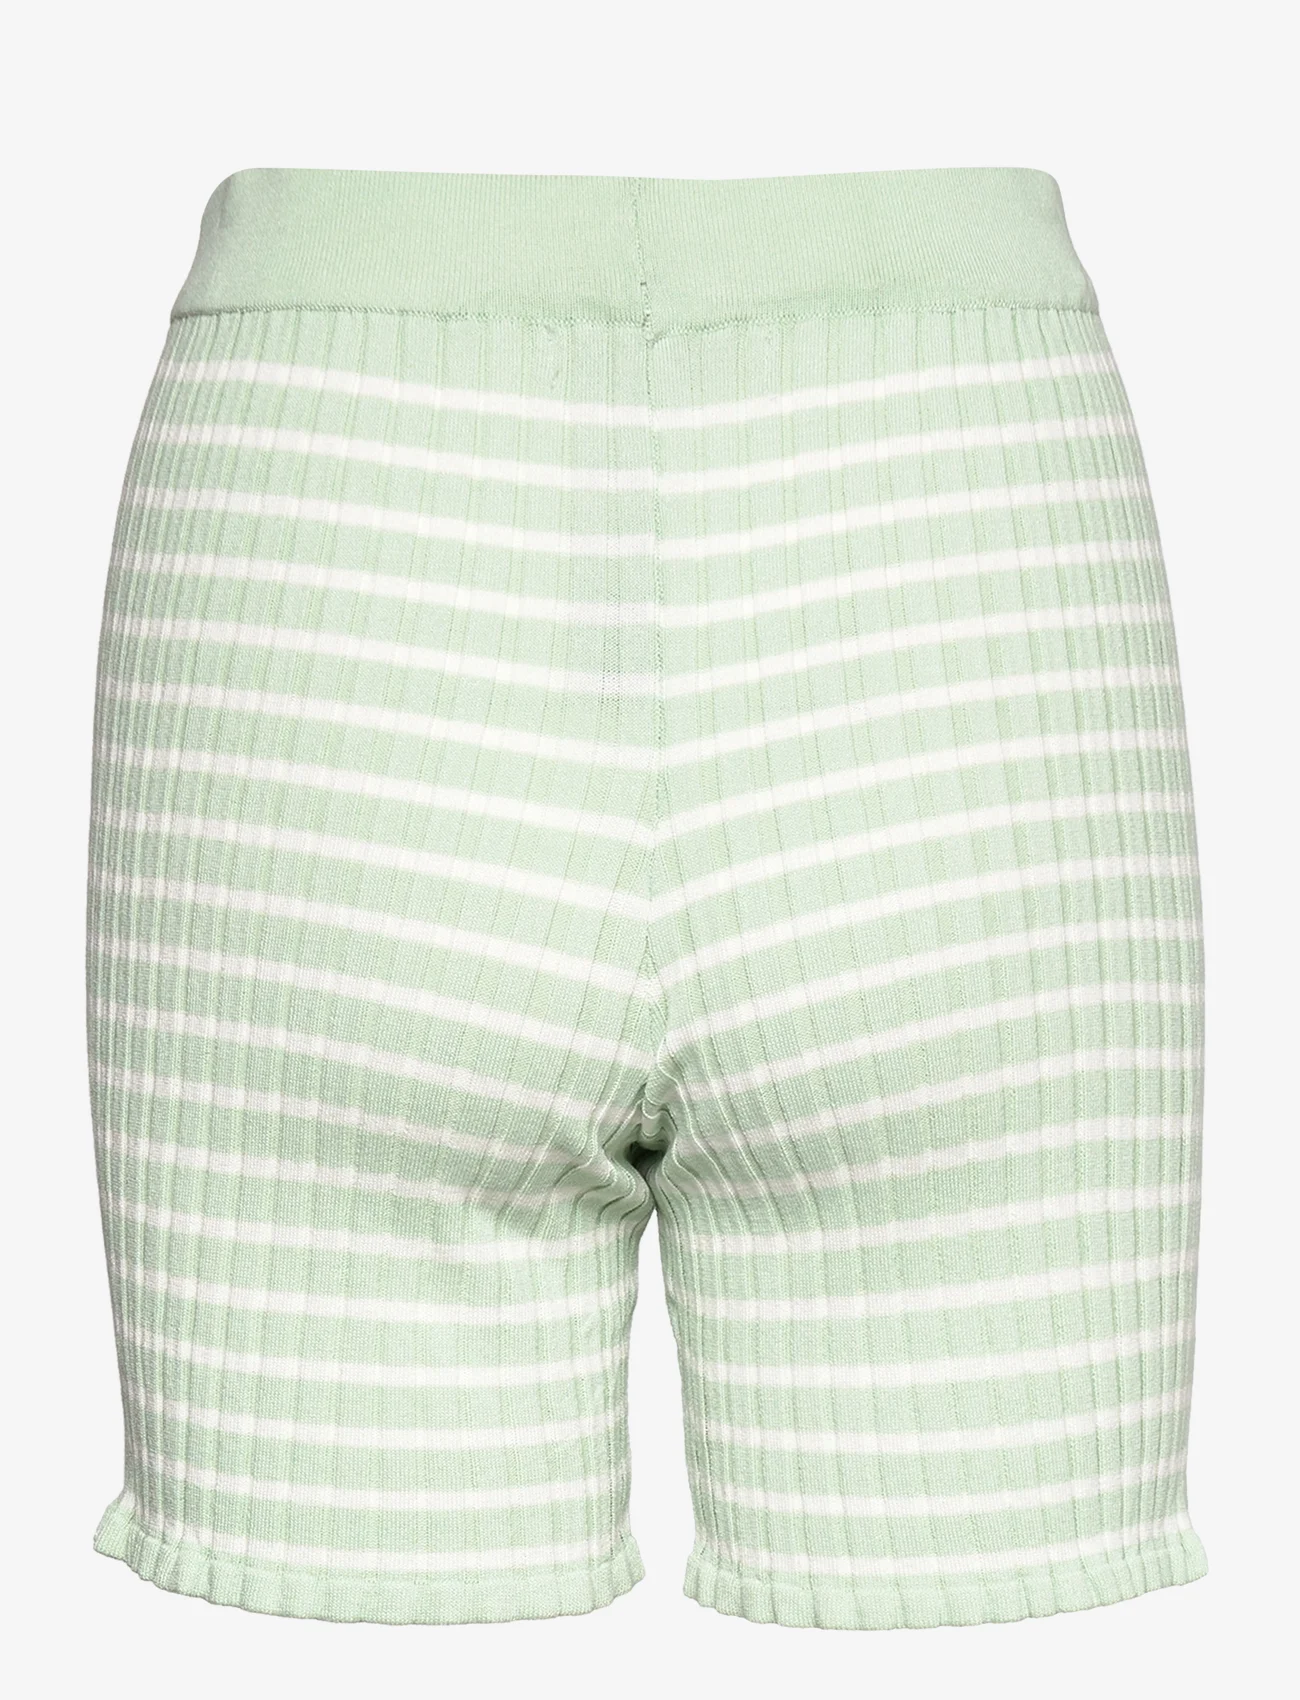 A-View - Sira shorts - ikdienas šorti - pale mint/off white - 1